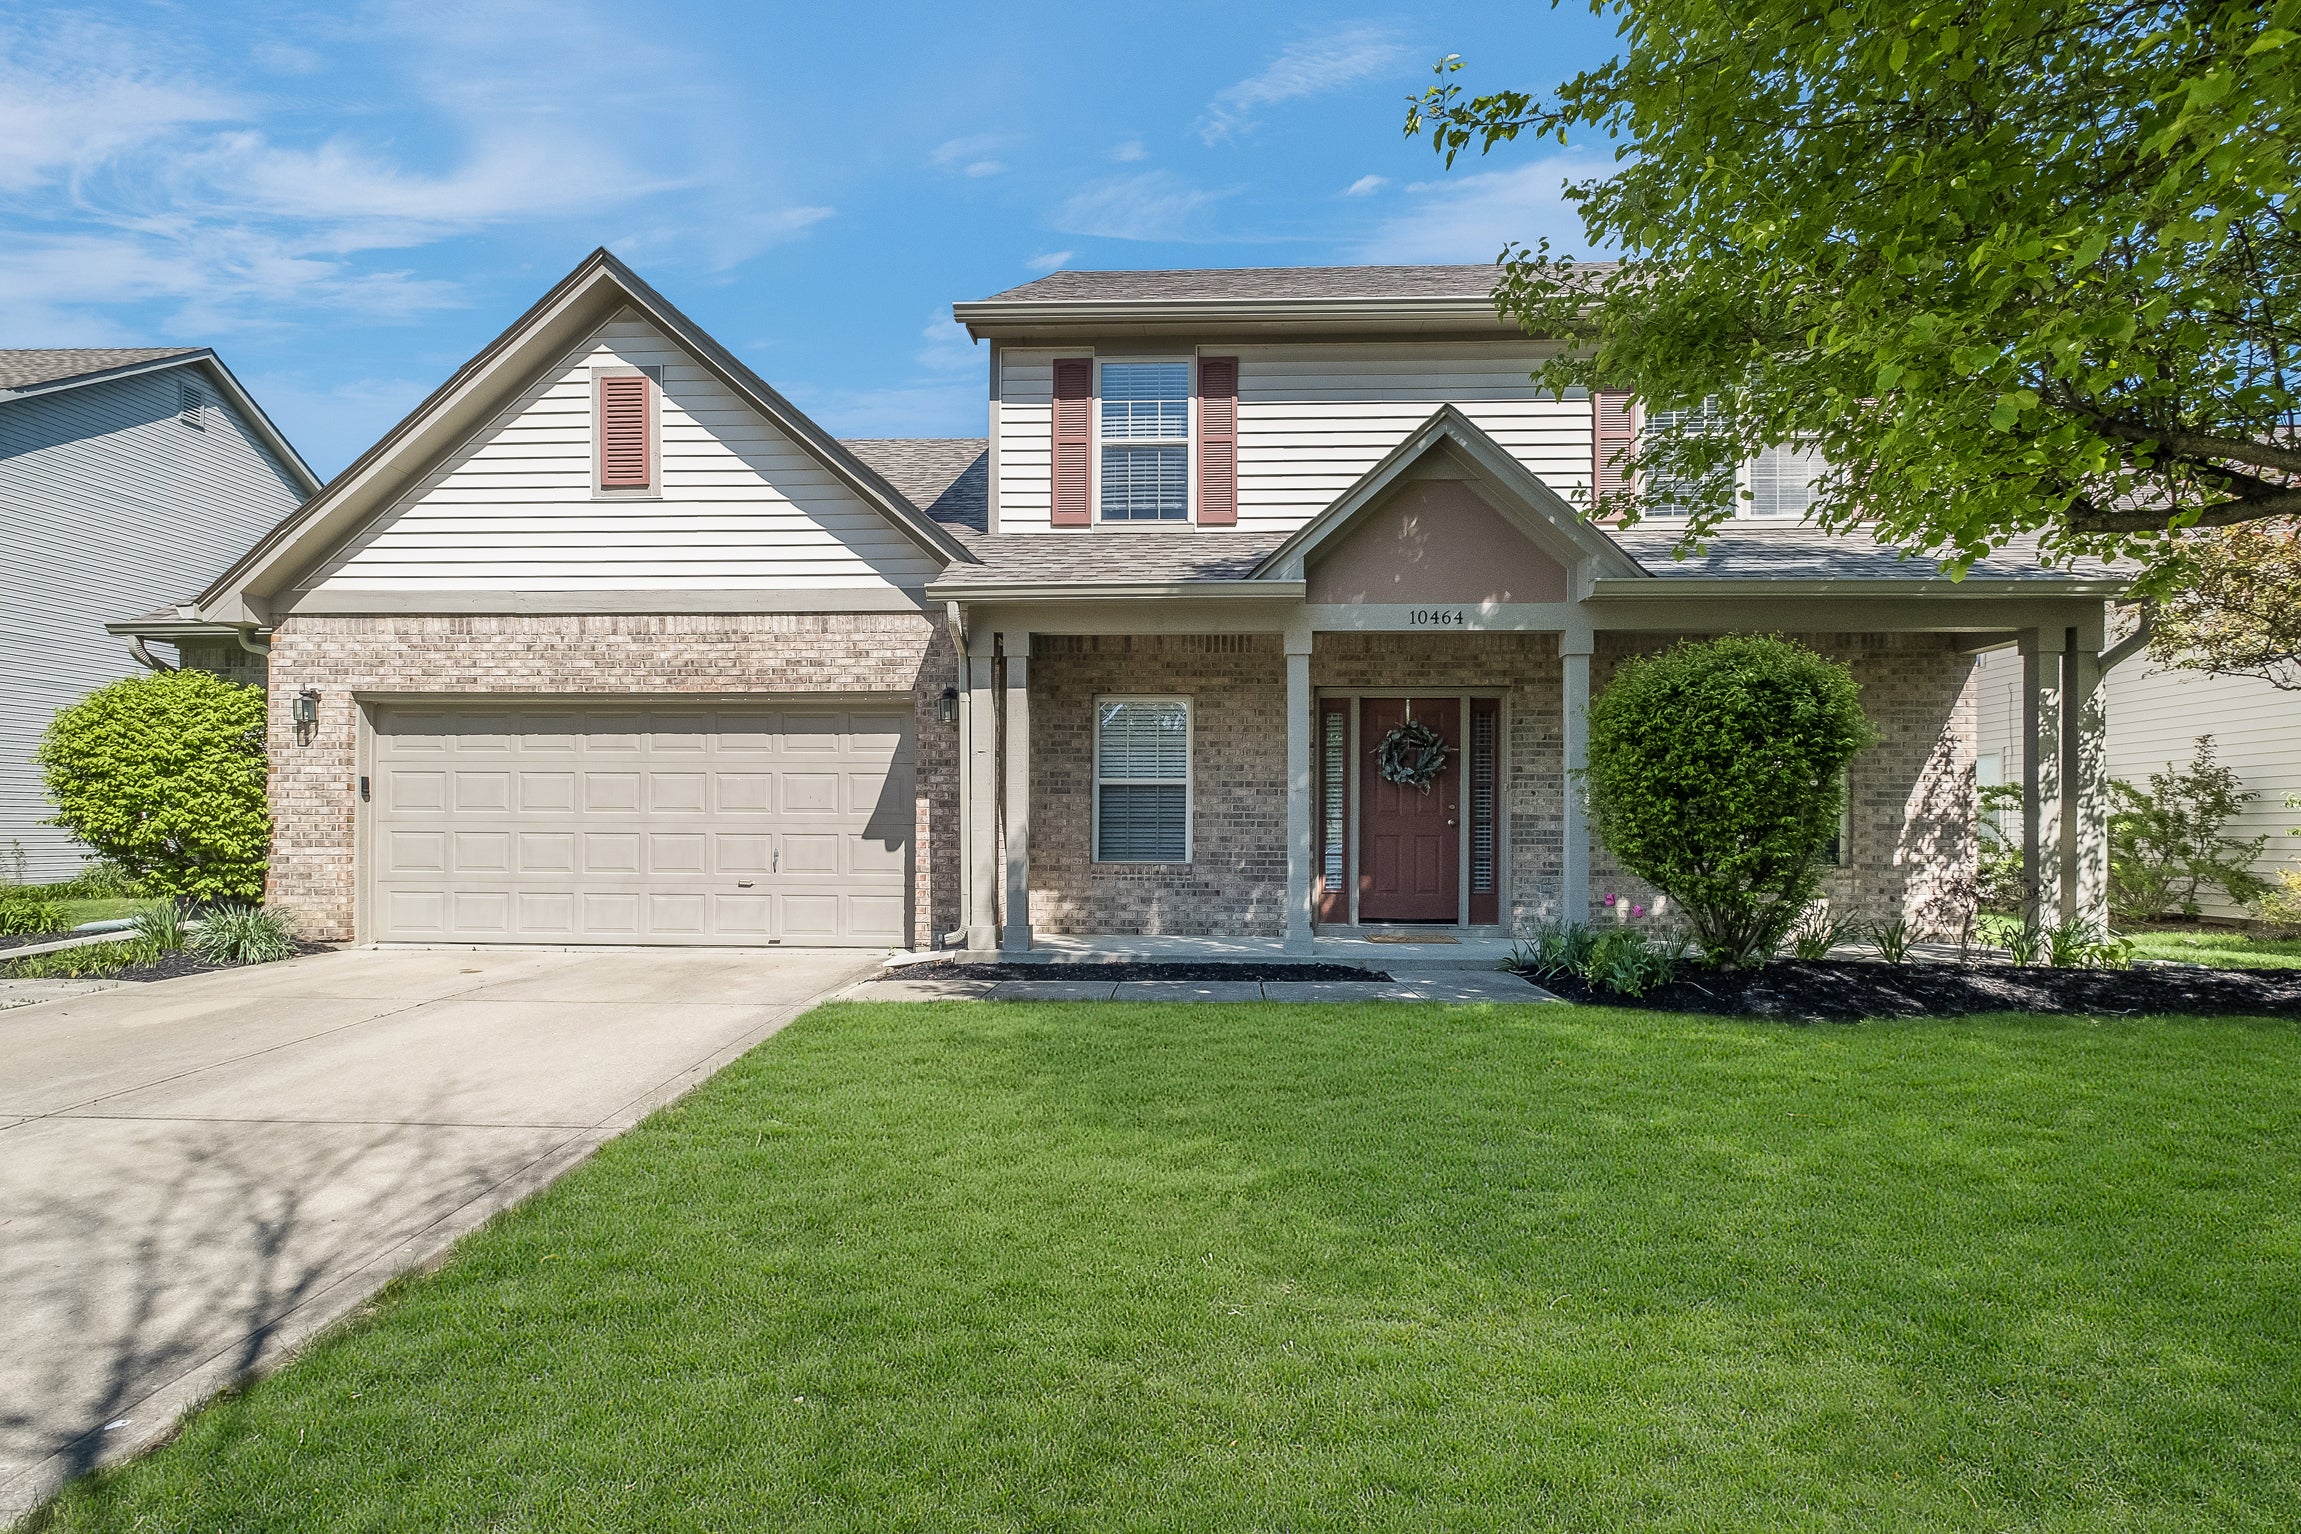 Photo of 10464 Magenta Drive Noblesville, IN 46060